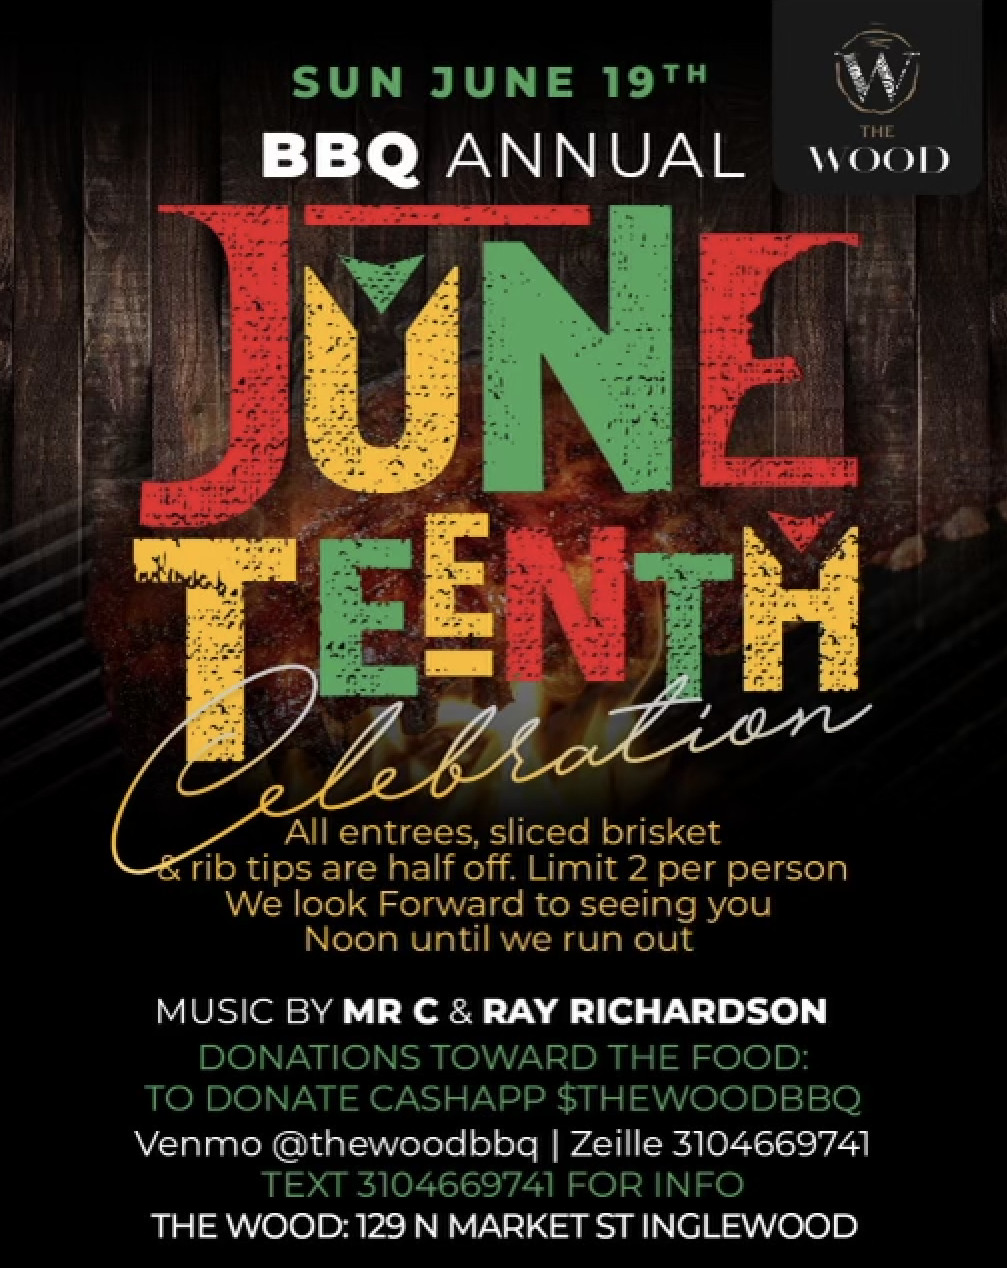 A flyer for Juneteenth celebration in Inglewood, California.